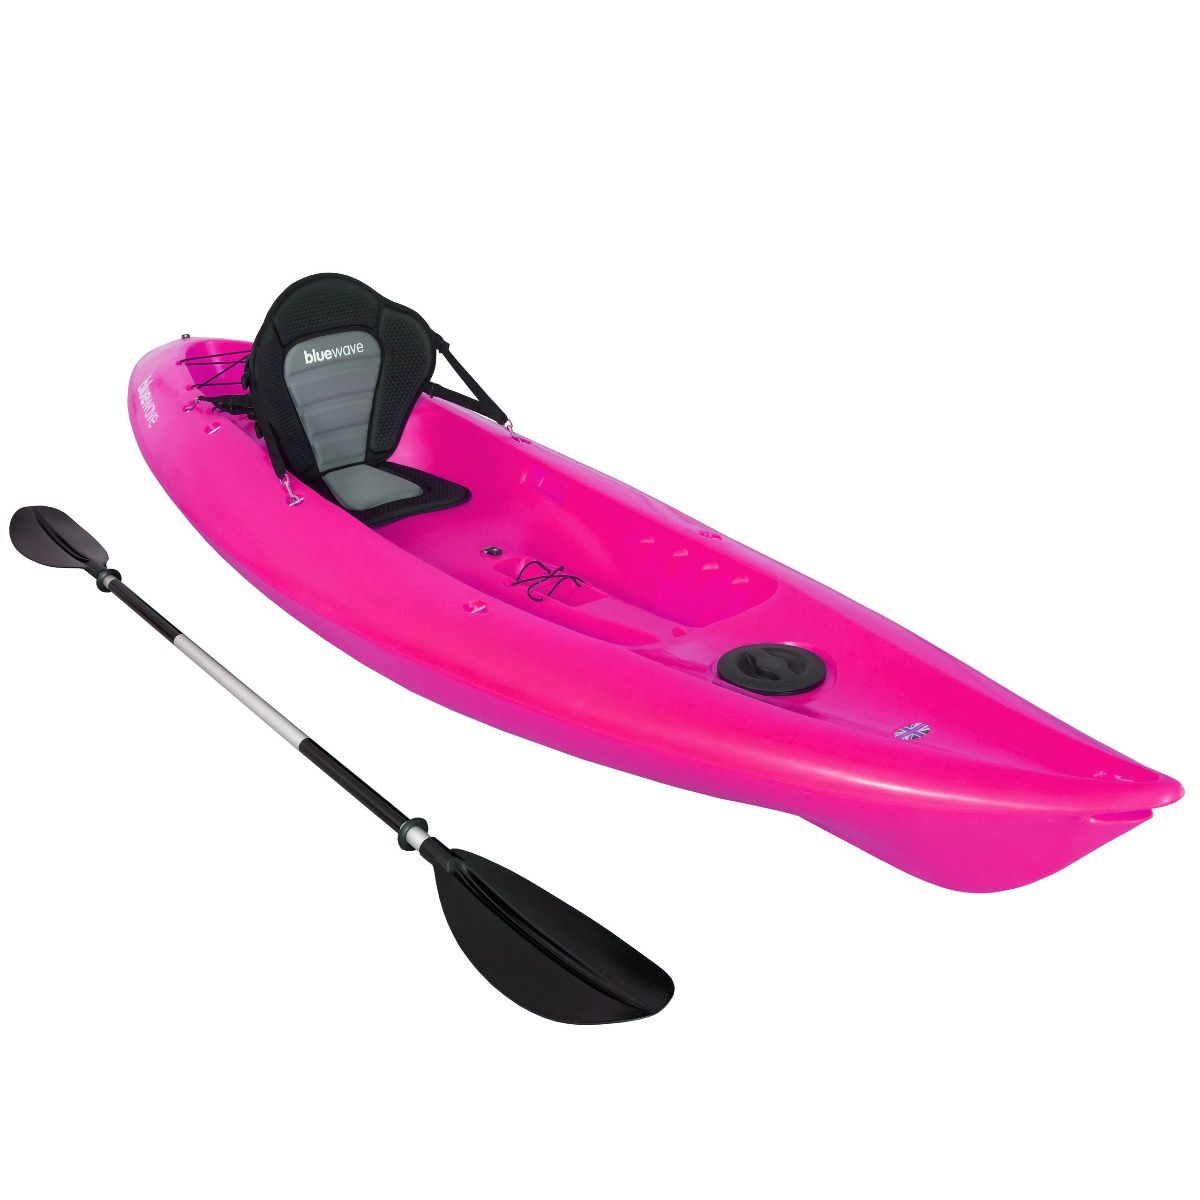 Bluewave Dart Sit On Top Touring Kayak Package - Fast and Agile Kayak for  Exploring - Includes Paddle and Seat - Order Online Now!